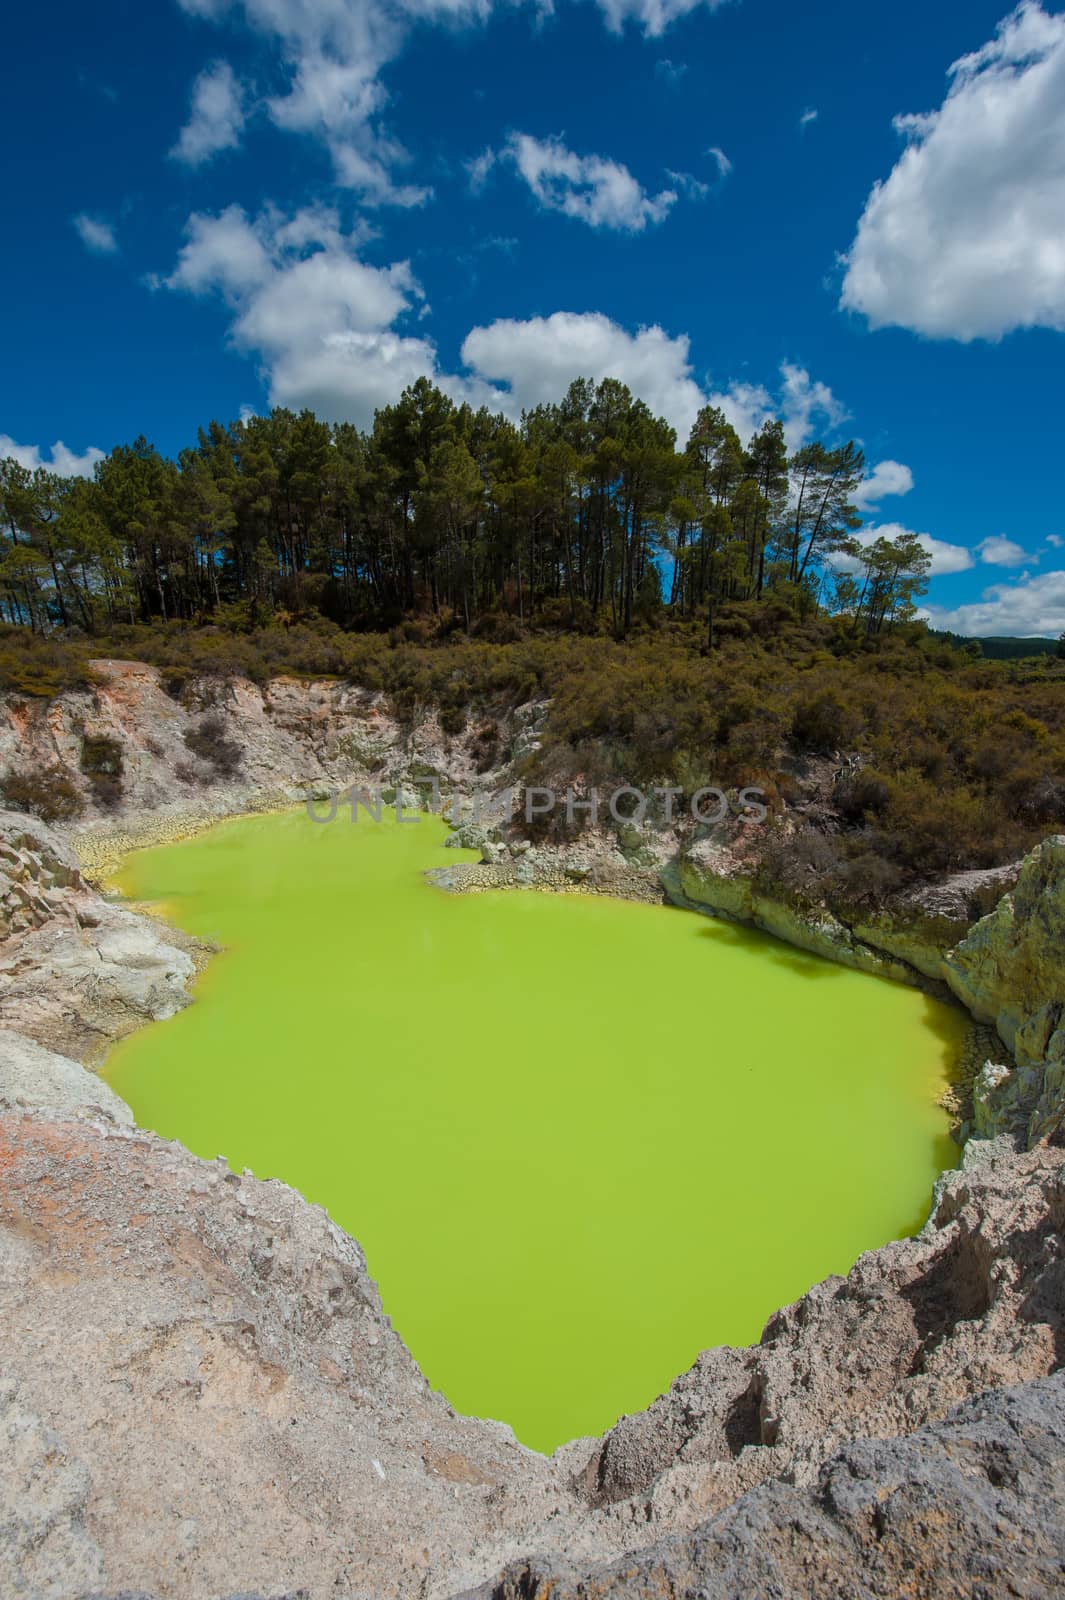 Incredibly green and highly toxic Devil's Bath crater lake at Wai-O-Tapu geothermal area, New Zealand